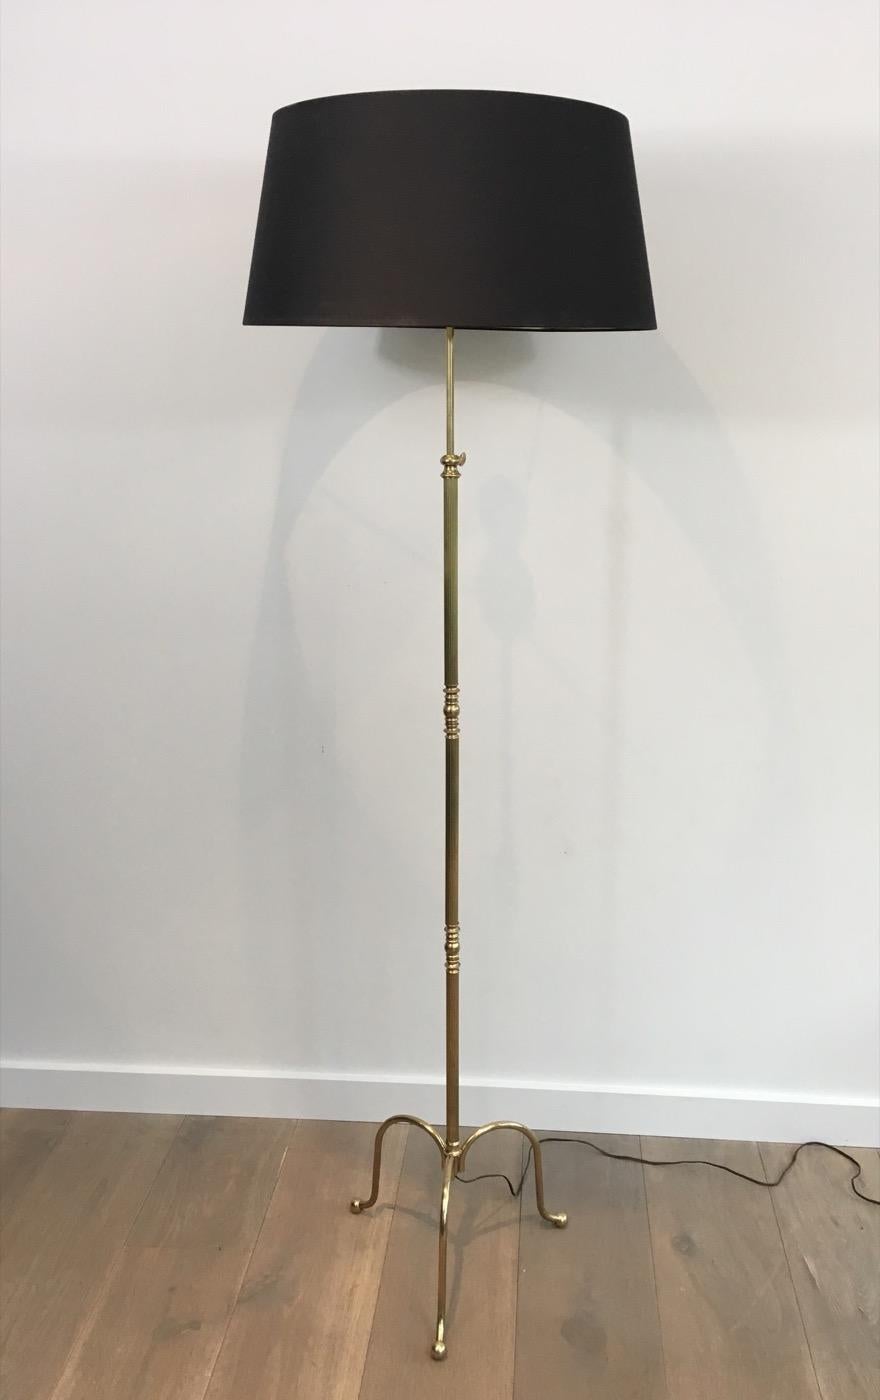 Neoclassical Adjustable Brass Floor Lamp with Black Shade Gold Inside, French im Zustand „Gut“ in Marcq-en-Barœul, Hauts-de-France